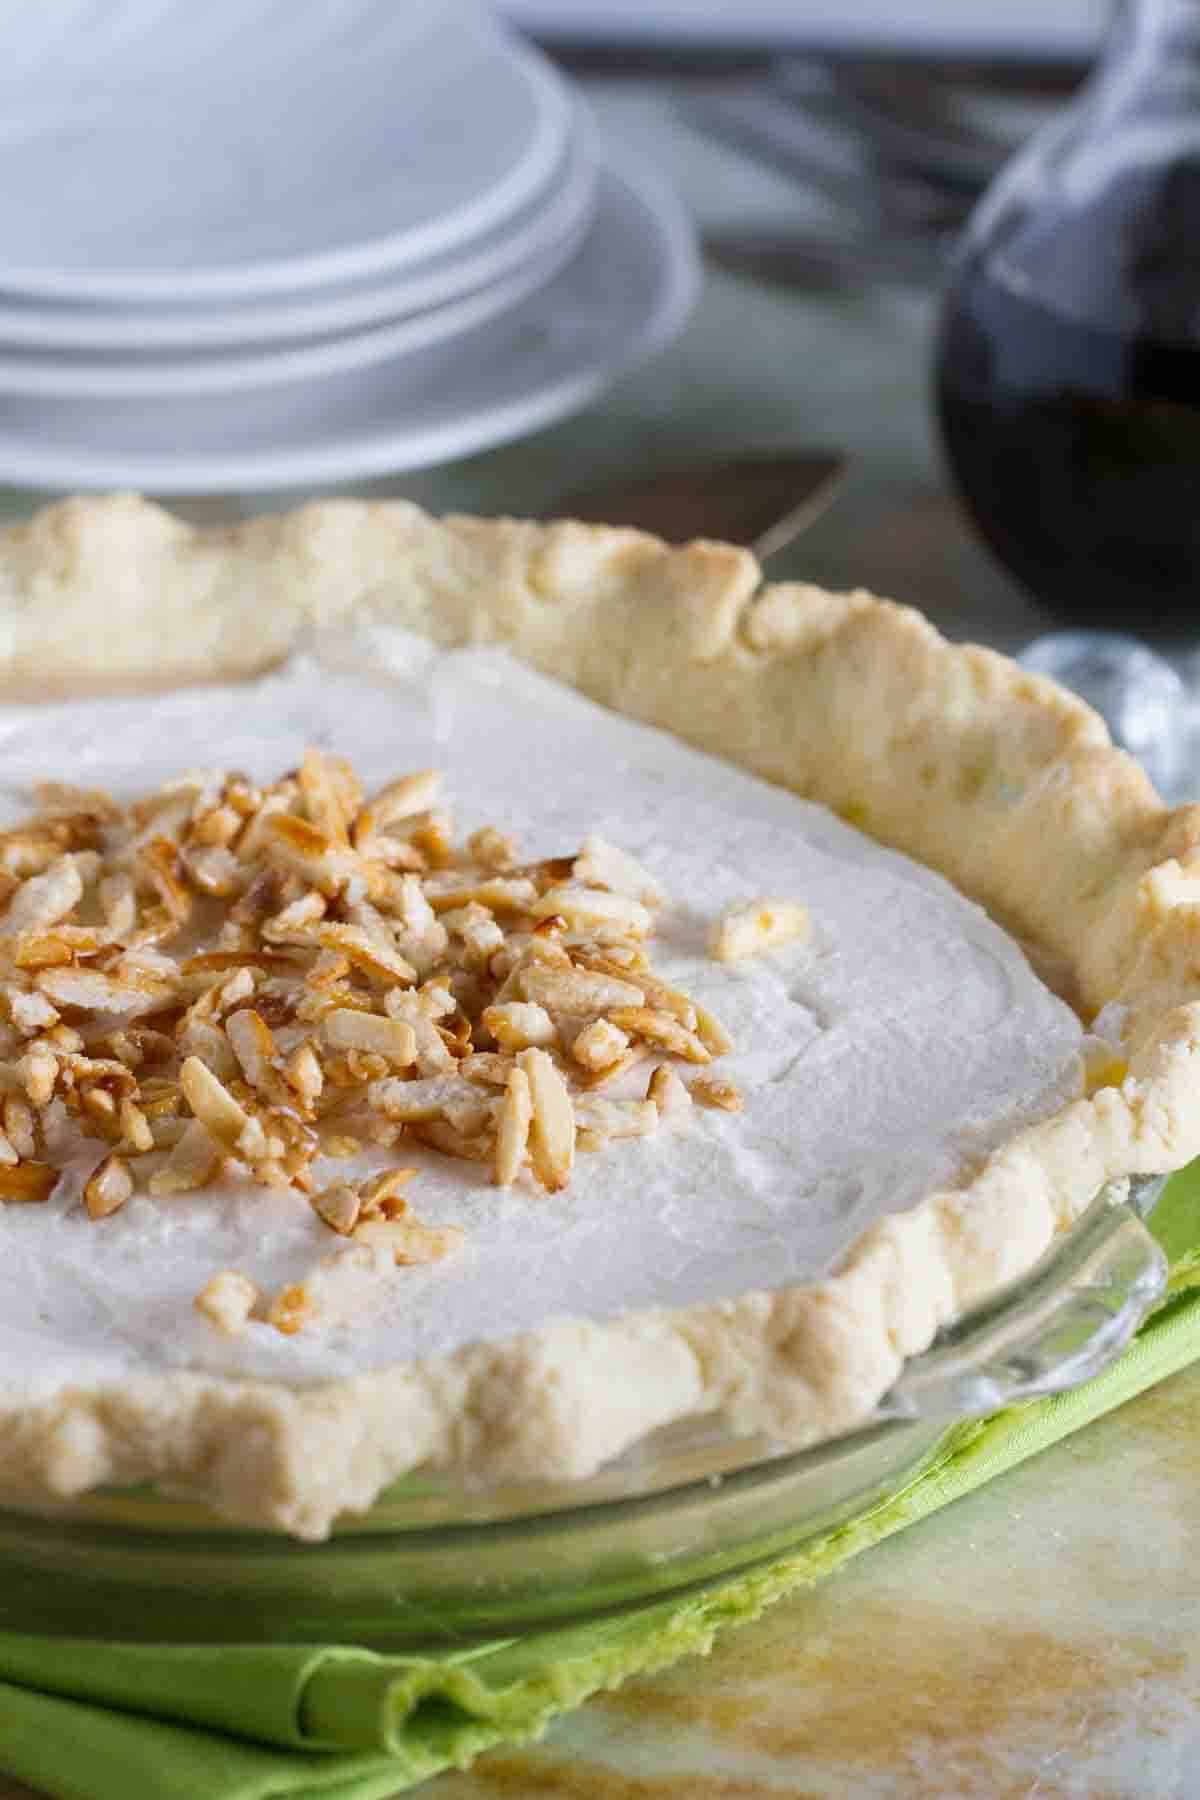 Full maple cream pie topped with almonds.